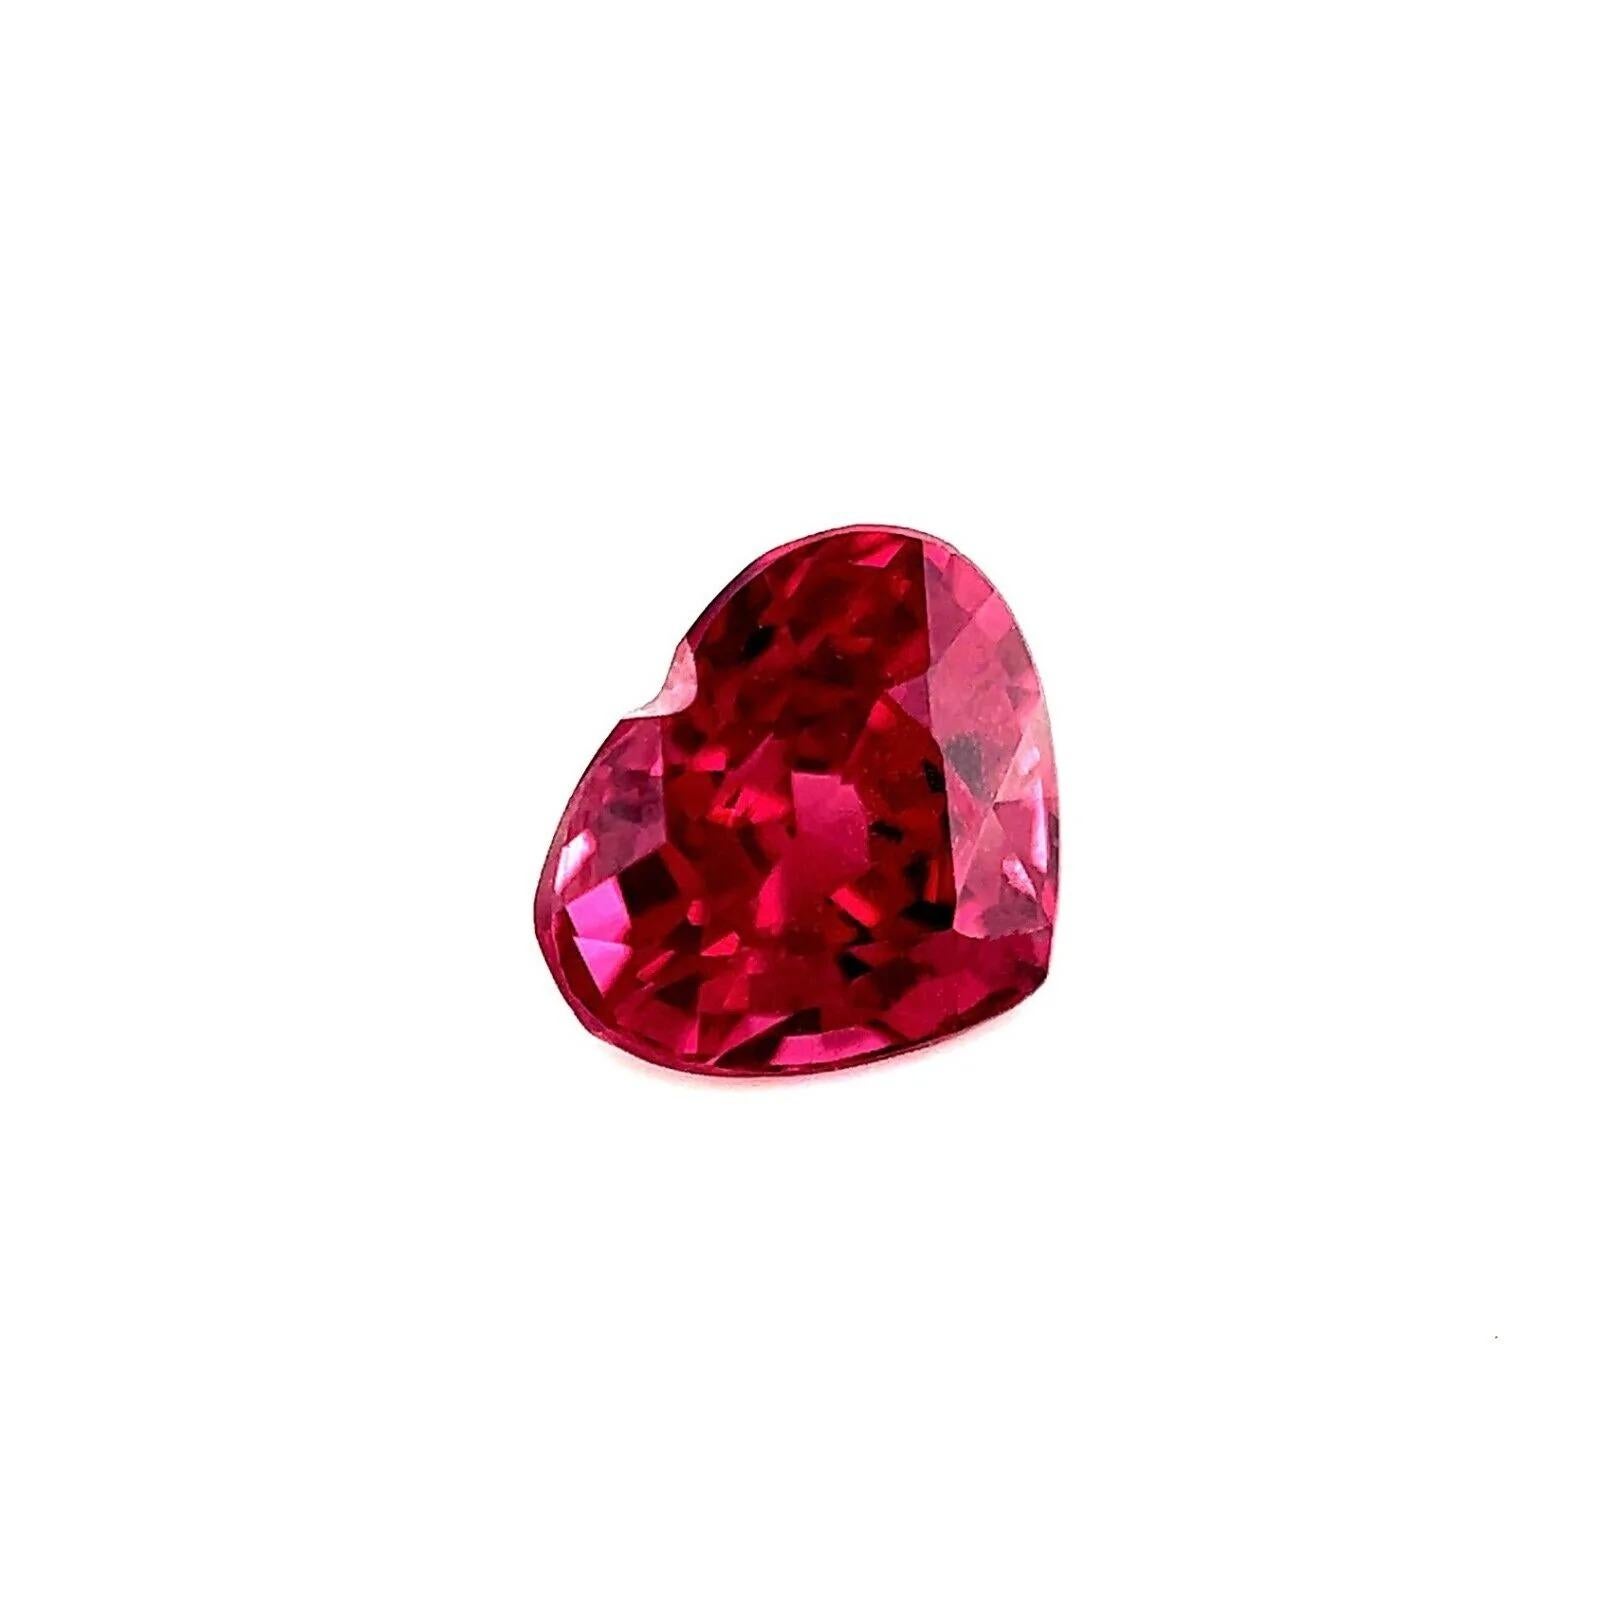 Fine 1.88ct Purplish Pink Rhodolite Garnet Heart Cut Loose Gem 7.8x6.5mm

Fine Natural Rhodolite Garnet Loose Gemstone.
1.88 Carat with a beautiful pink purplish colour and very good clarity. This stone also has an excellent heart cut with good